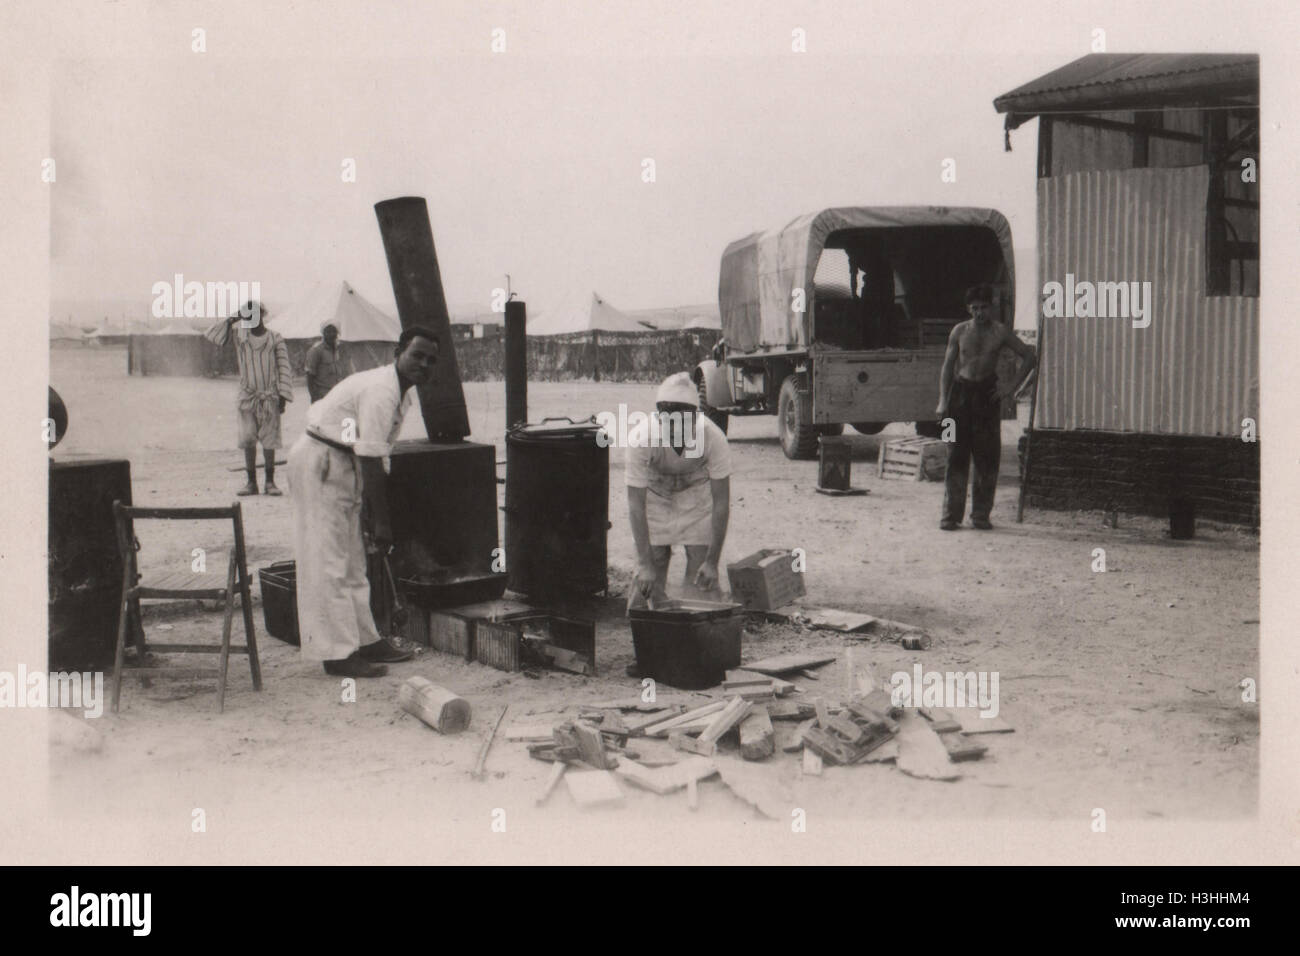 Unidentified Egyptian men preparing food on a wood fired cooking stove in a British army camp. Photo taken in 10 Base Ordnance Depot Royal Army Ordnance Corps (RAOC) camp at Geneifa Ismailia area near the Suez Canal 1952 Stock Photo